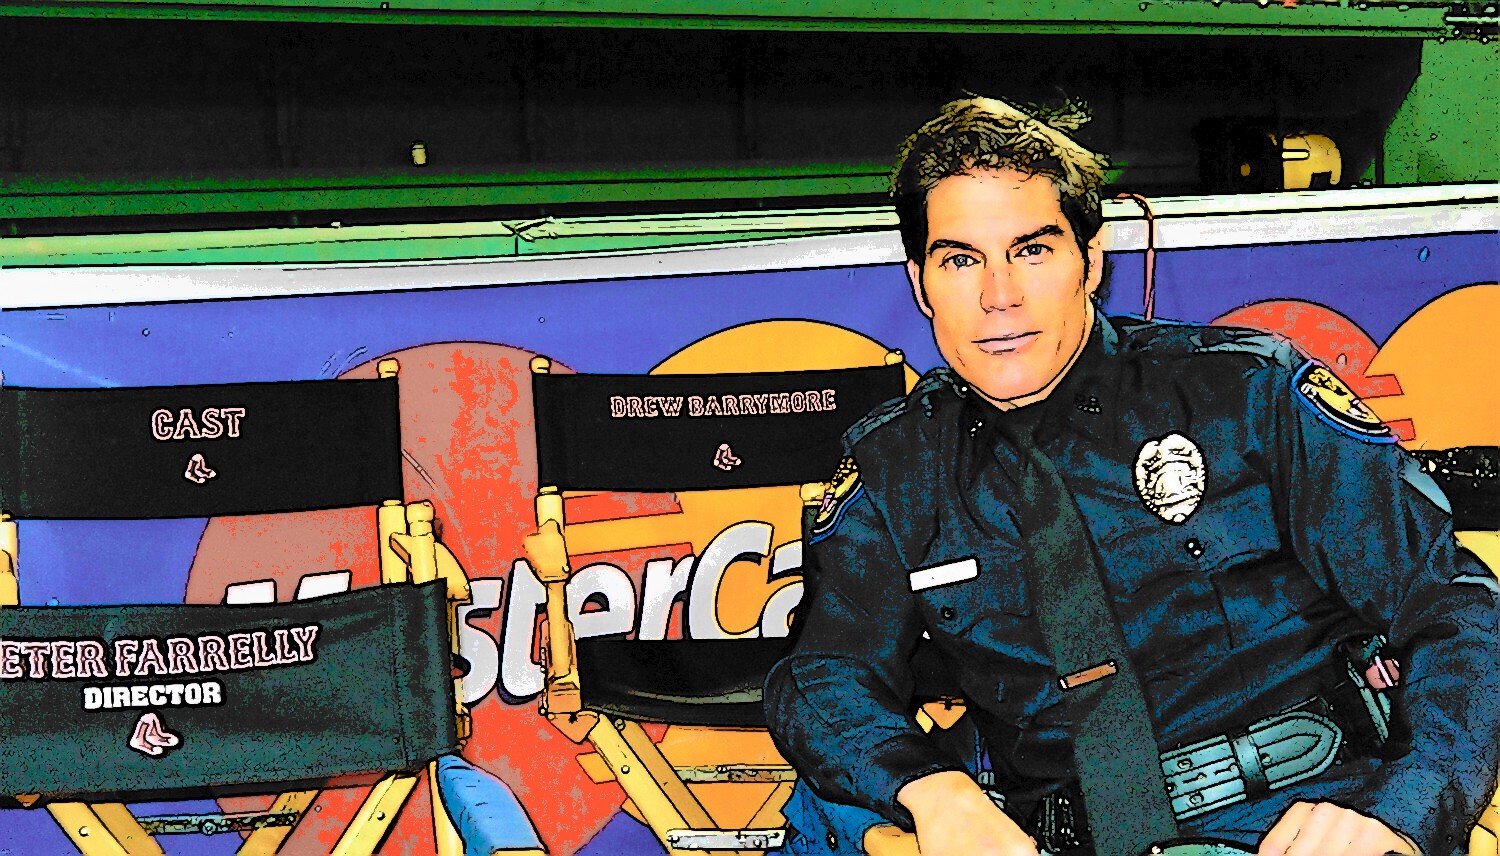 Cartoon Pix of Paul Sampson relaxing on the set of the 20th Century Fox film 